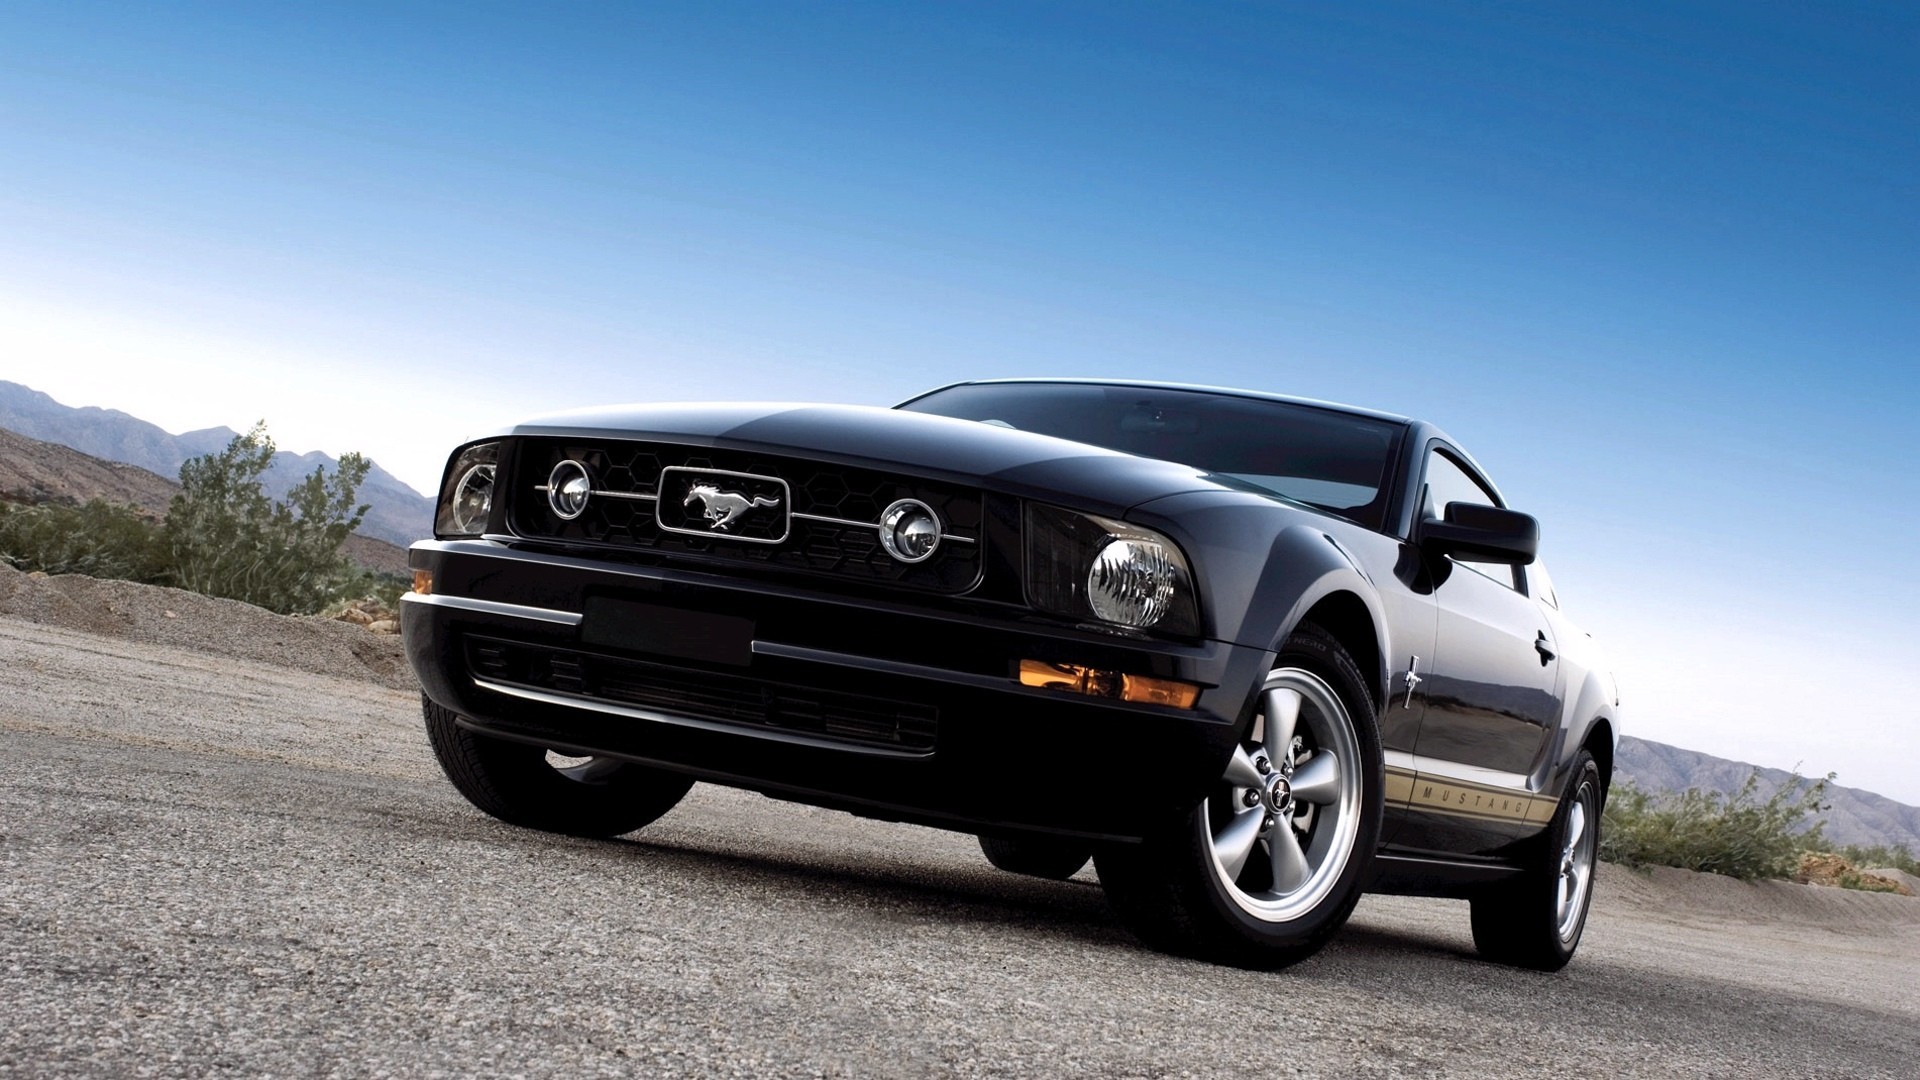 General 1920x1080 Ford Mustang muscle cars car frontal view Ford vehicle black cars Ford Mustang S-197 American cars